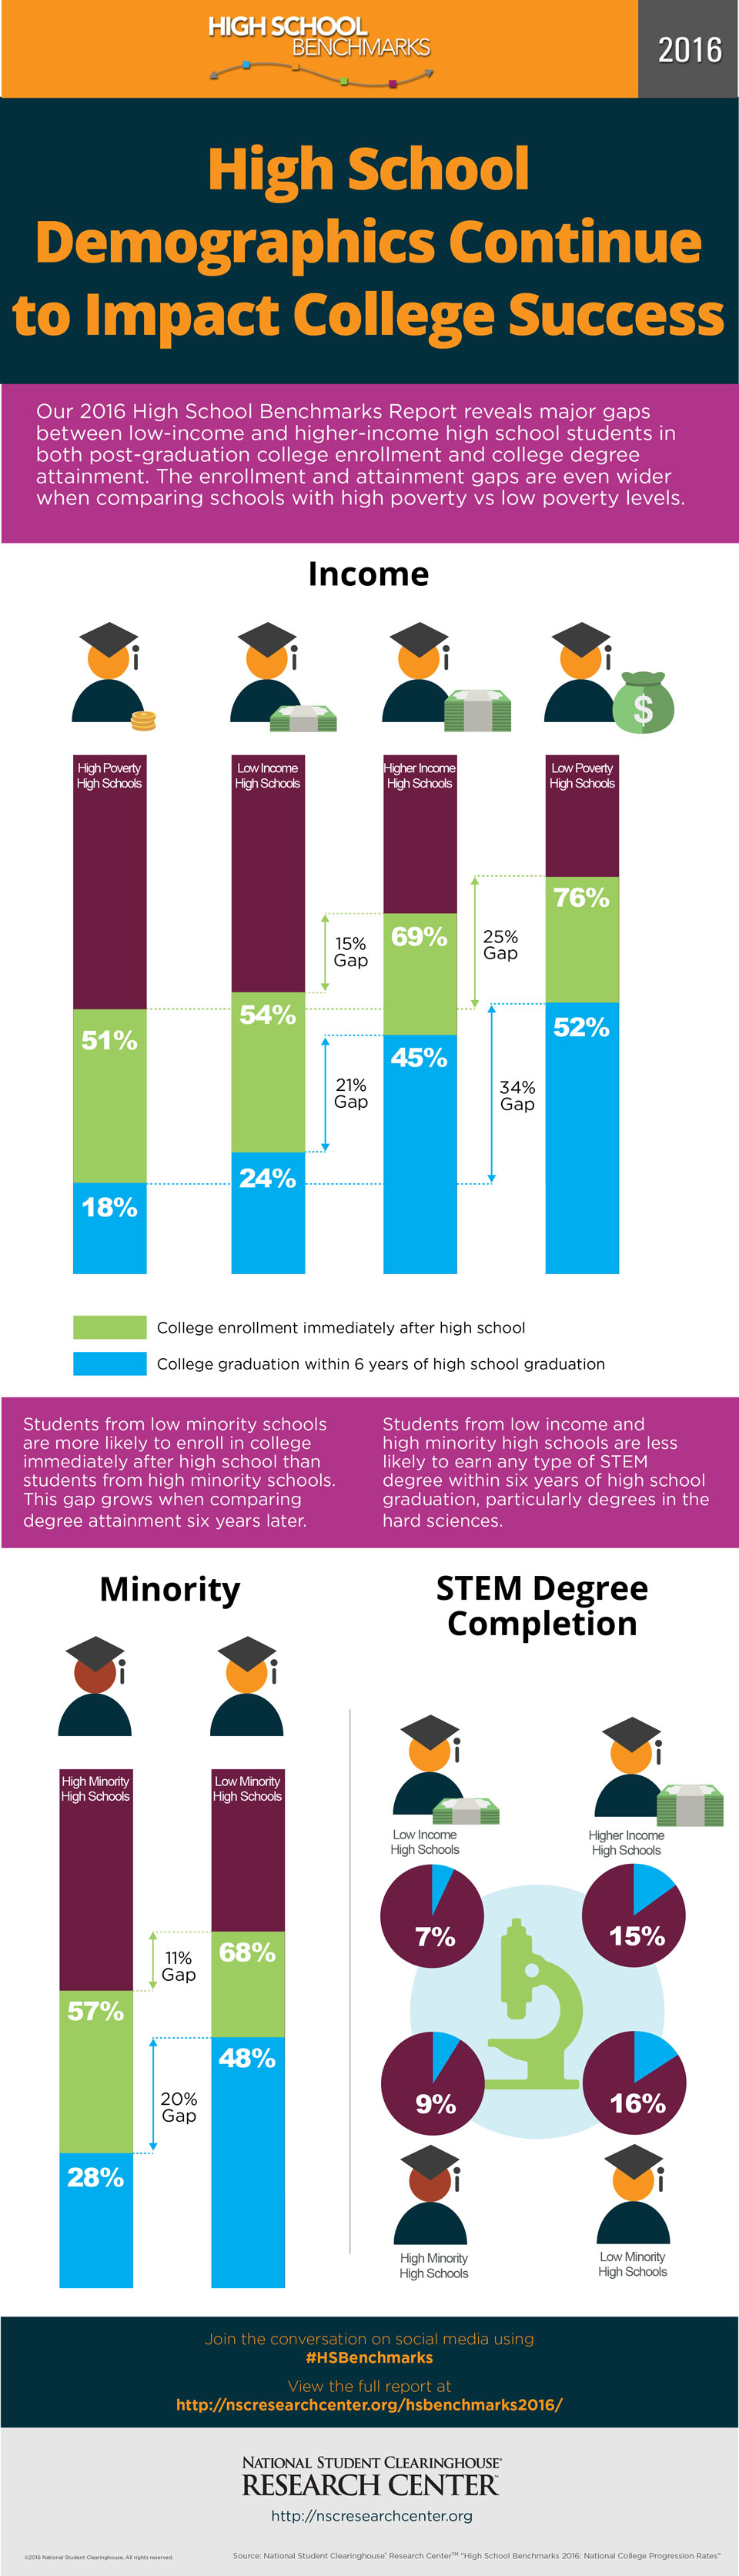 2016 High School Demographics Continue to Impact College Success